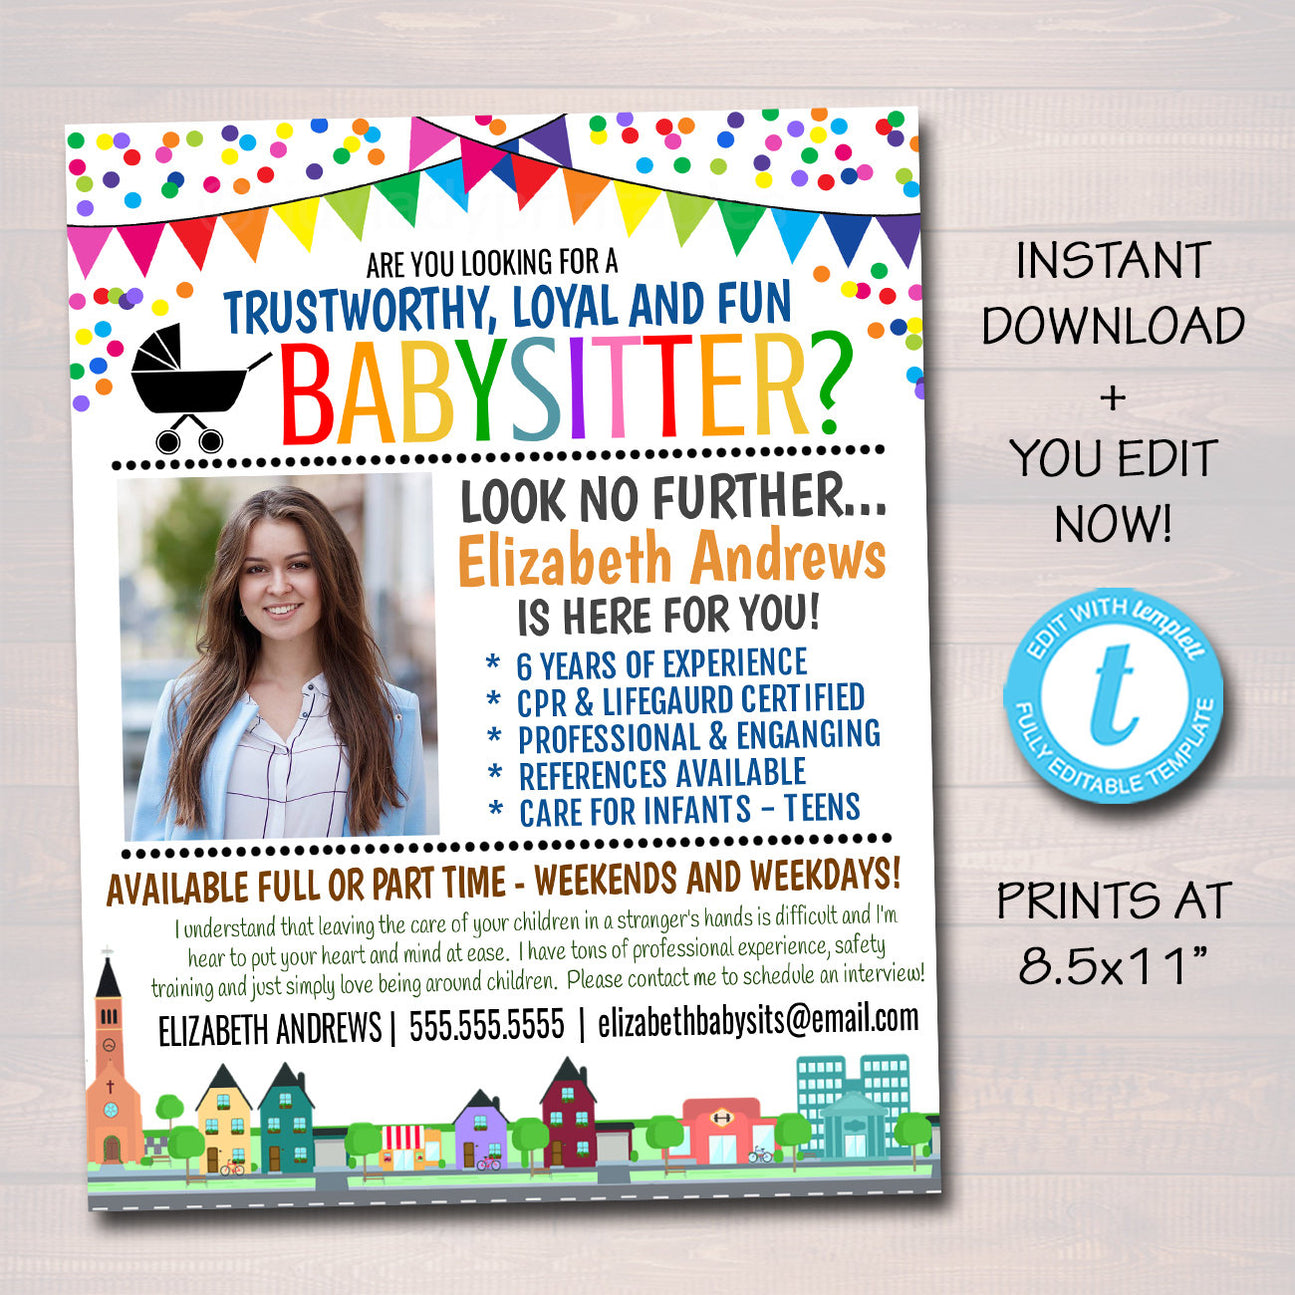 Babysitter Services Flyer Template TidyLady Printables